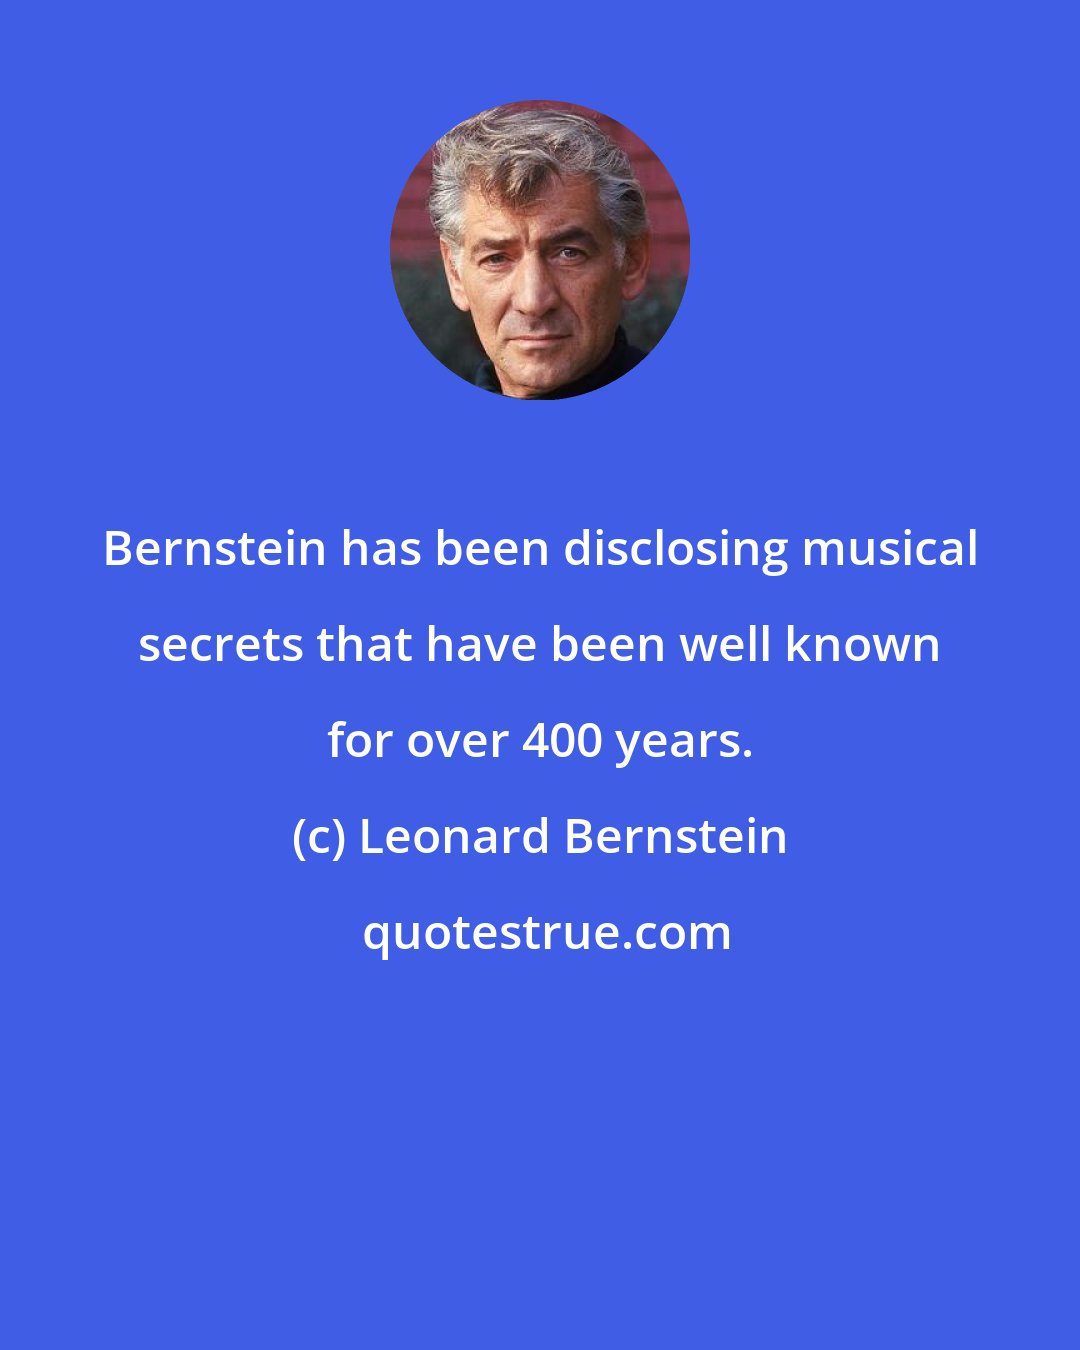 Leonard Bernstein: Bernstein has been disclosing musical secrets that have been well known for over 400 years.